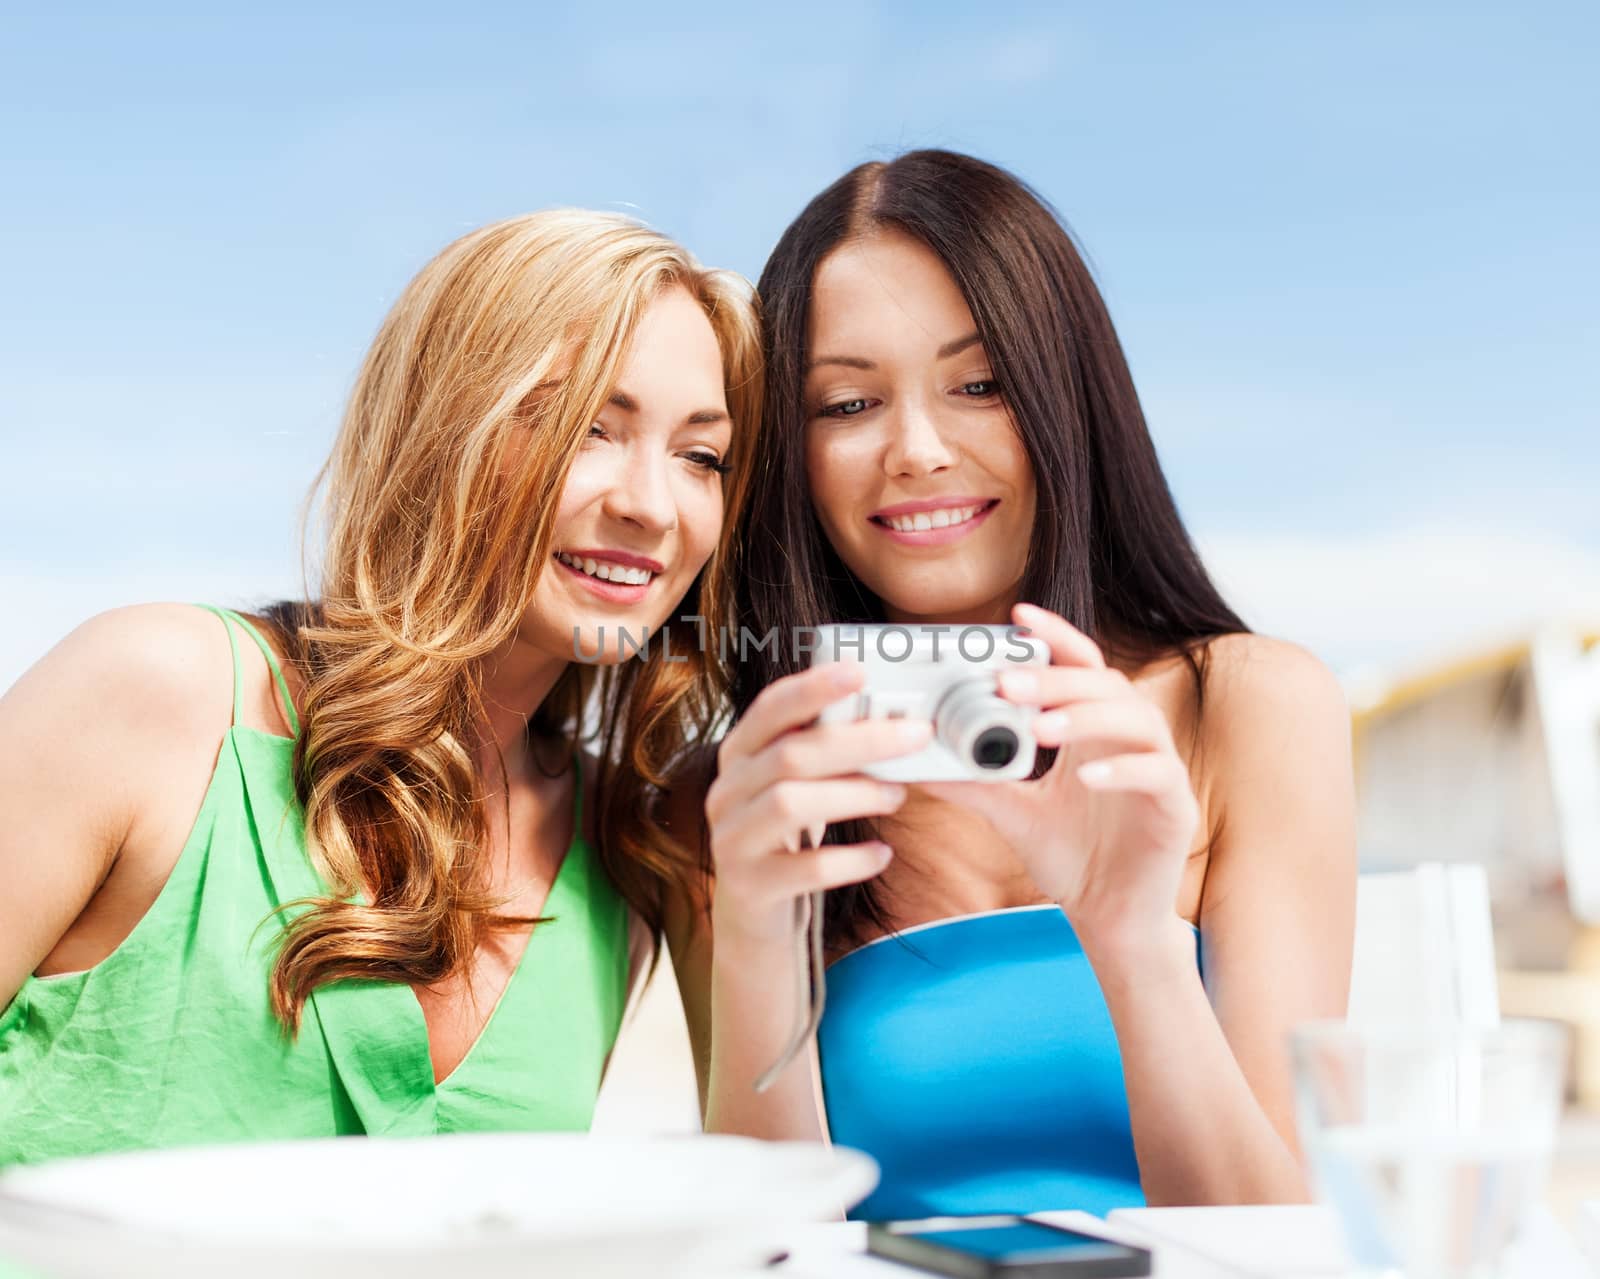 summer holidays, vacation and technology - girls looking at digital camera in cafe on the beach